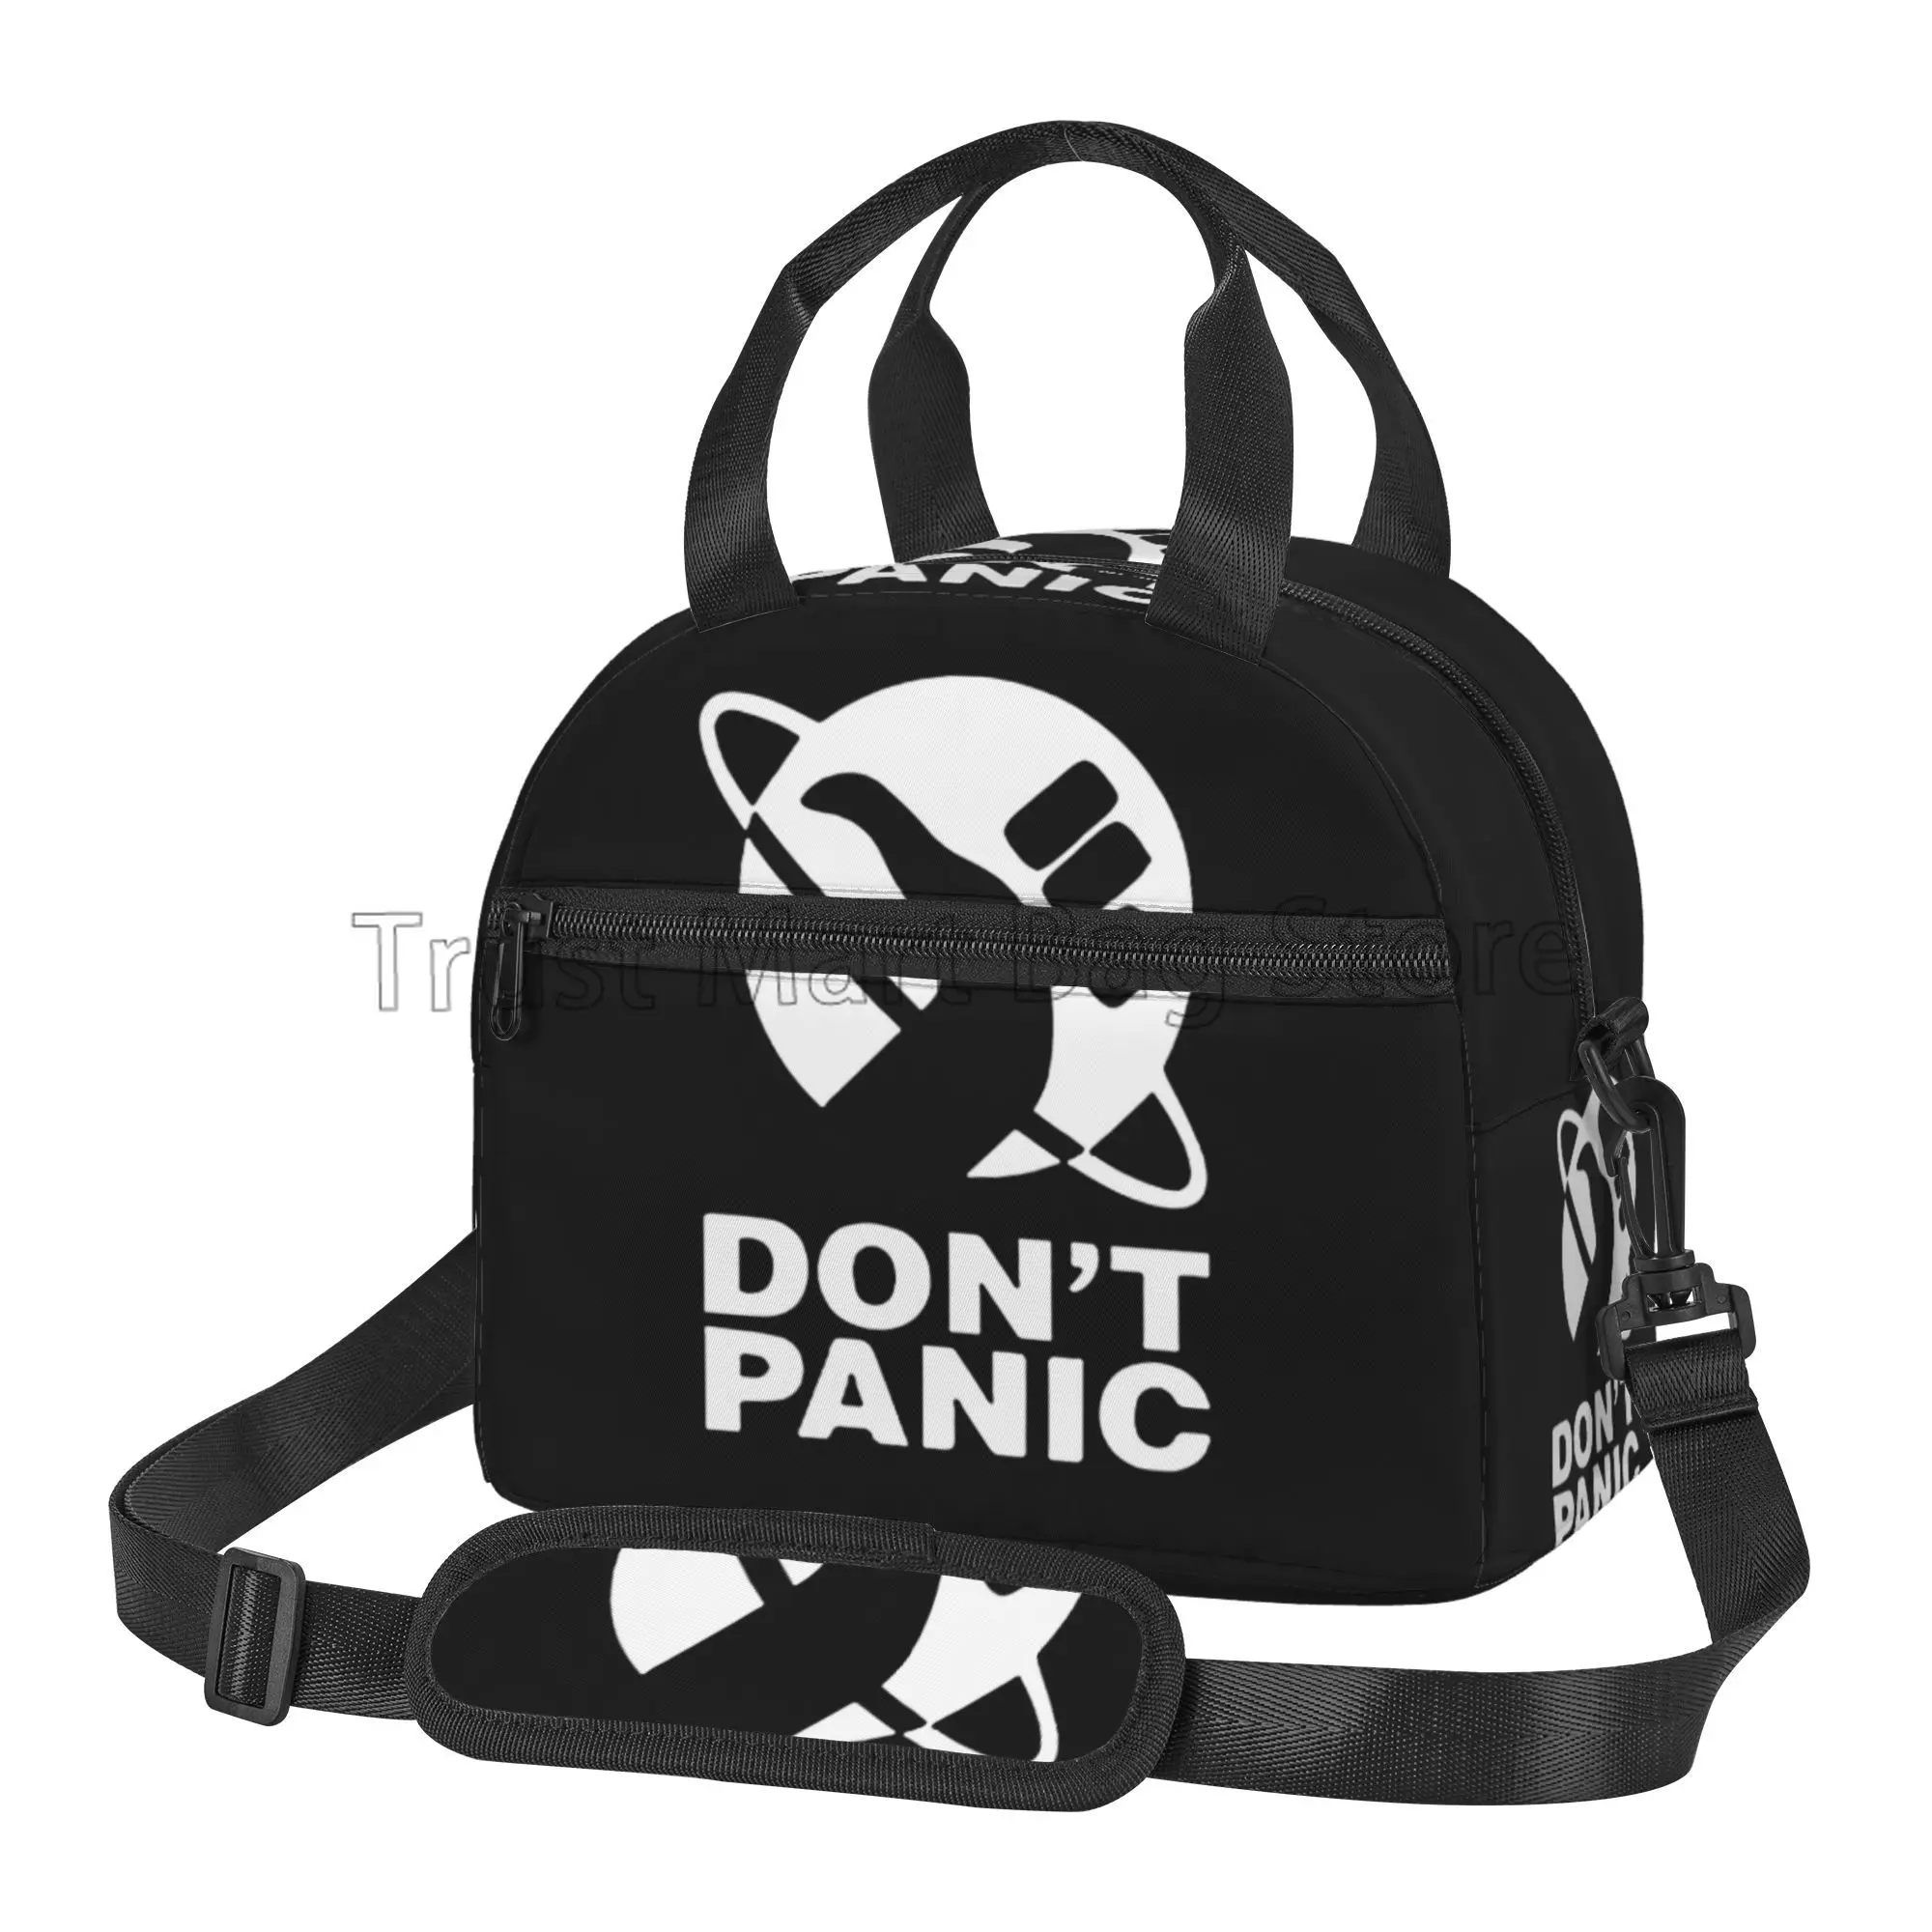 

Don't Panic Print Lunch Bags for Women Men Resuable Portable Thermal Bento Box with Adjustable Shoulder Strap for Work School